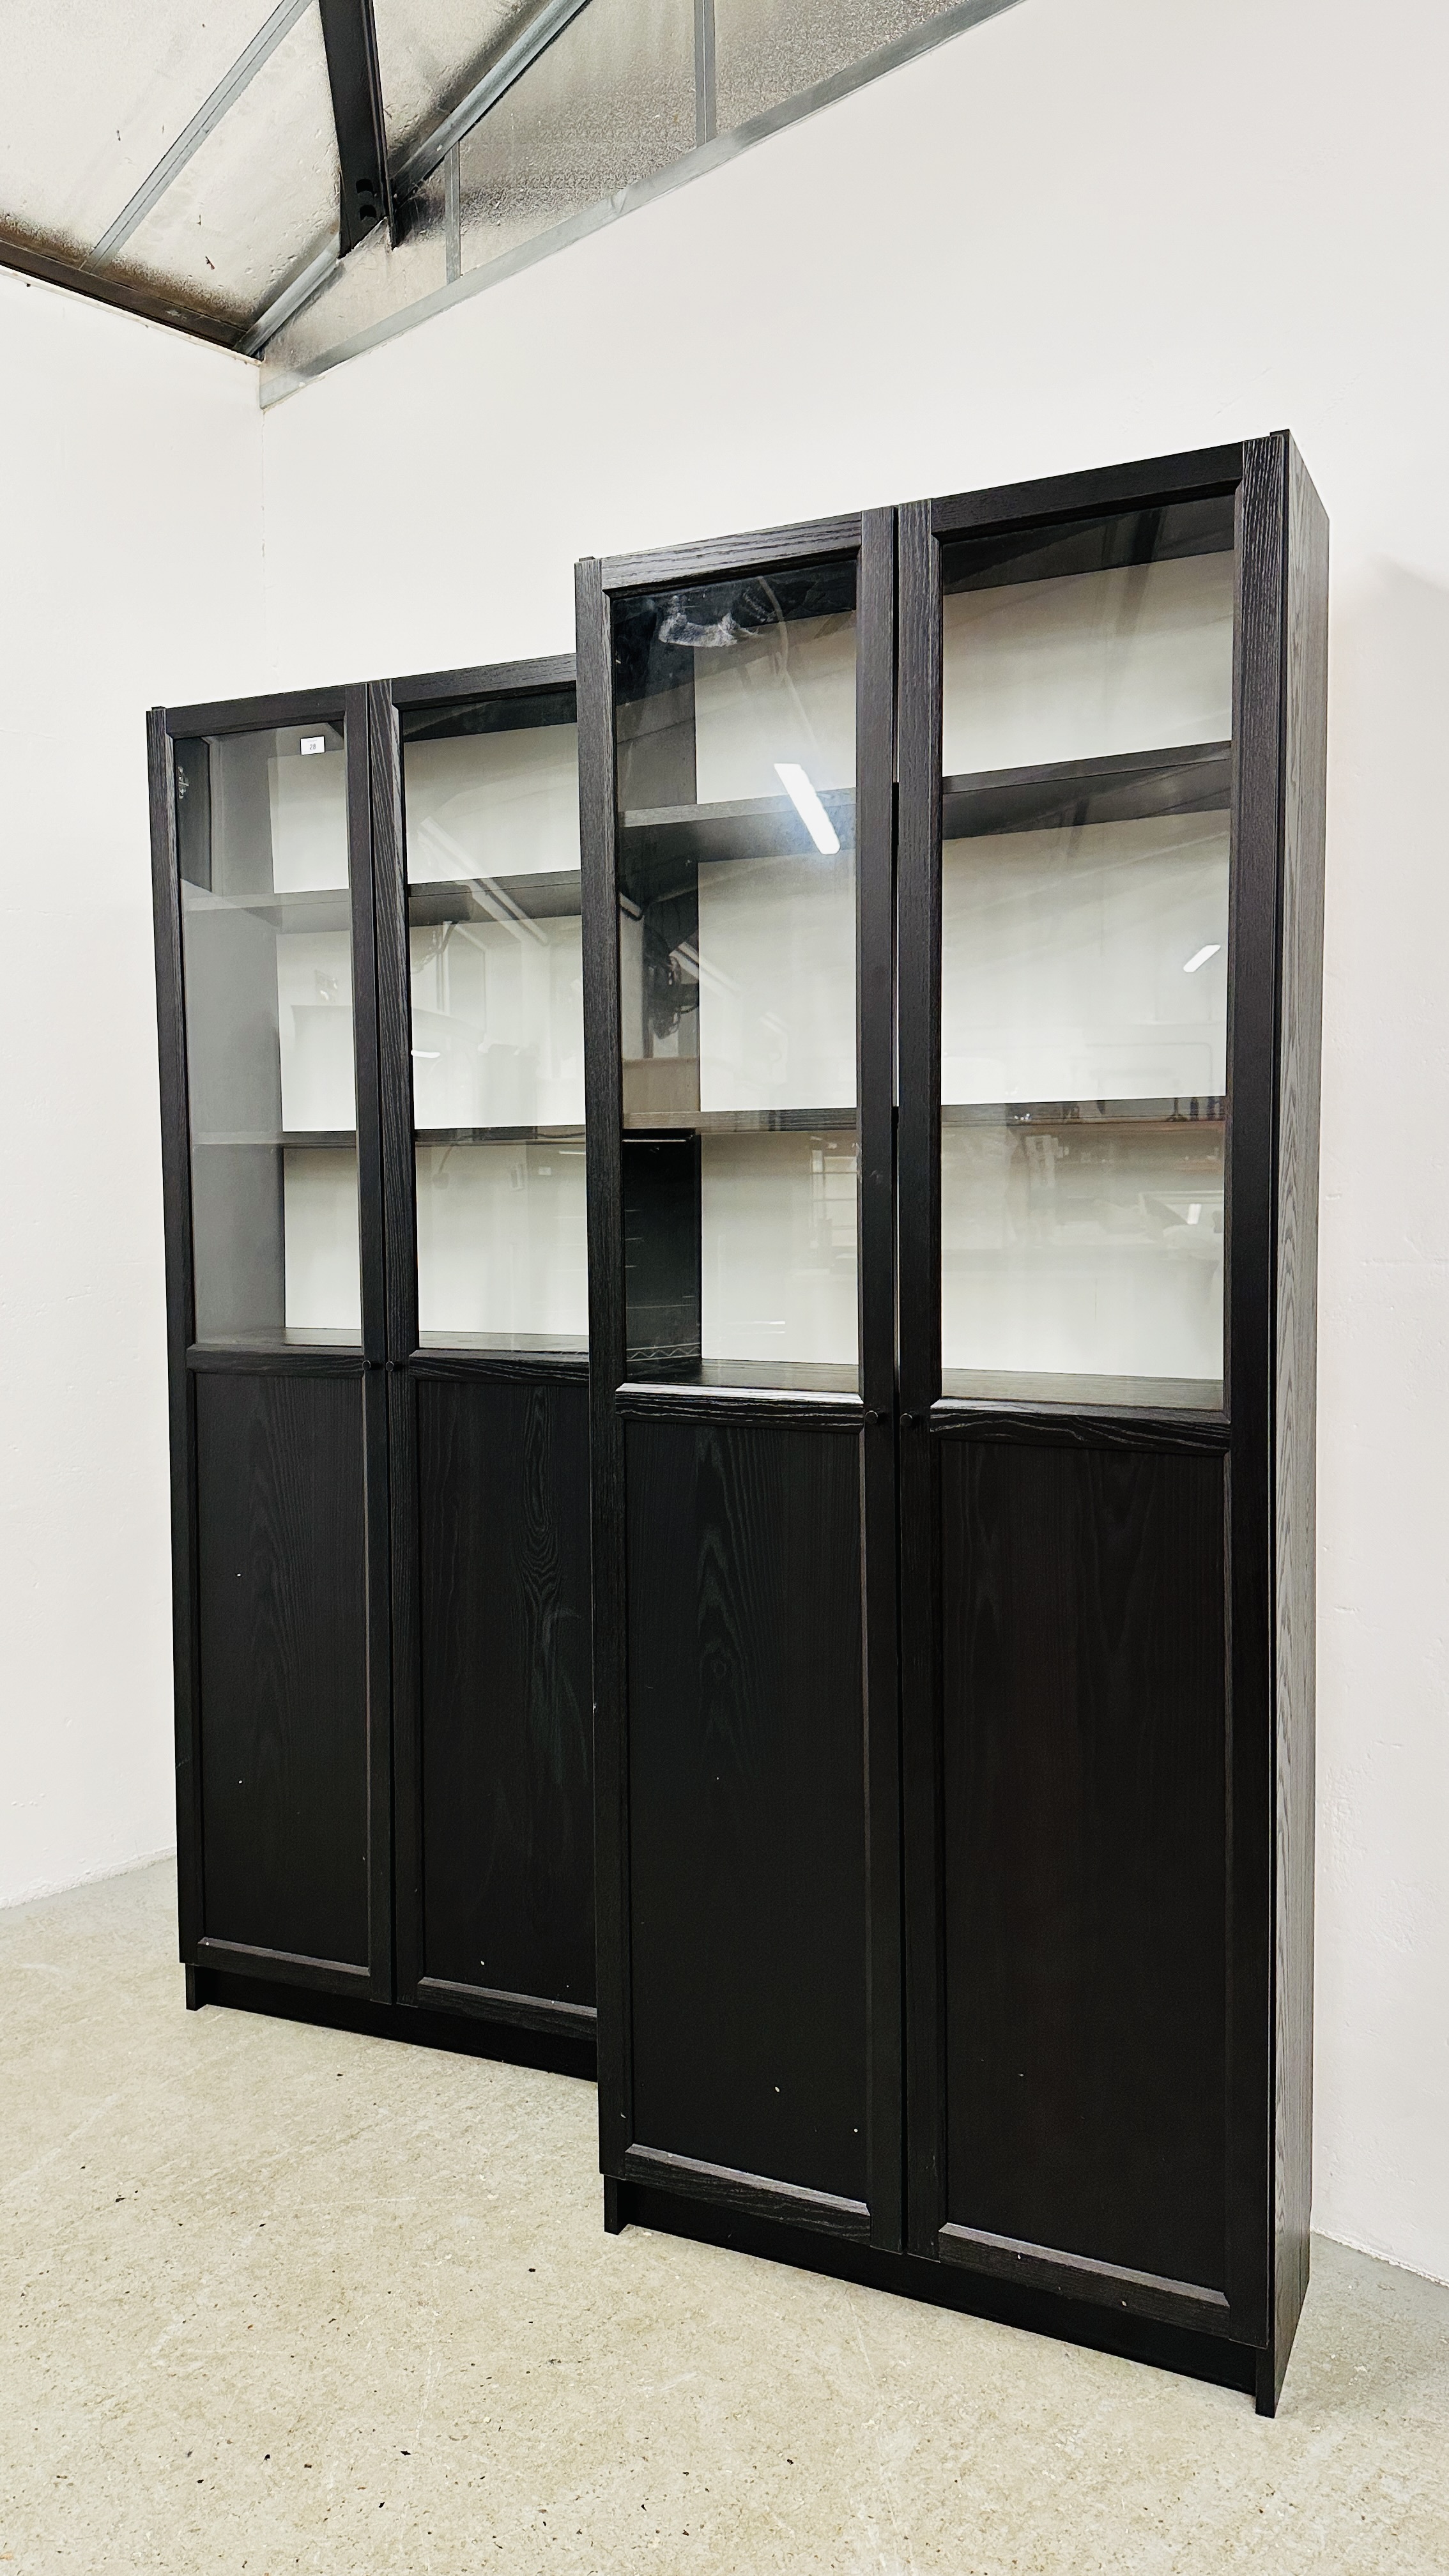 2 X MODERN BLACK ASH EFFECT FINISH FULL HEIGHT WALL CABINETS WITH GLAZED TOPS EACH W 80CM, D 30CM,